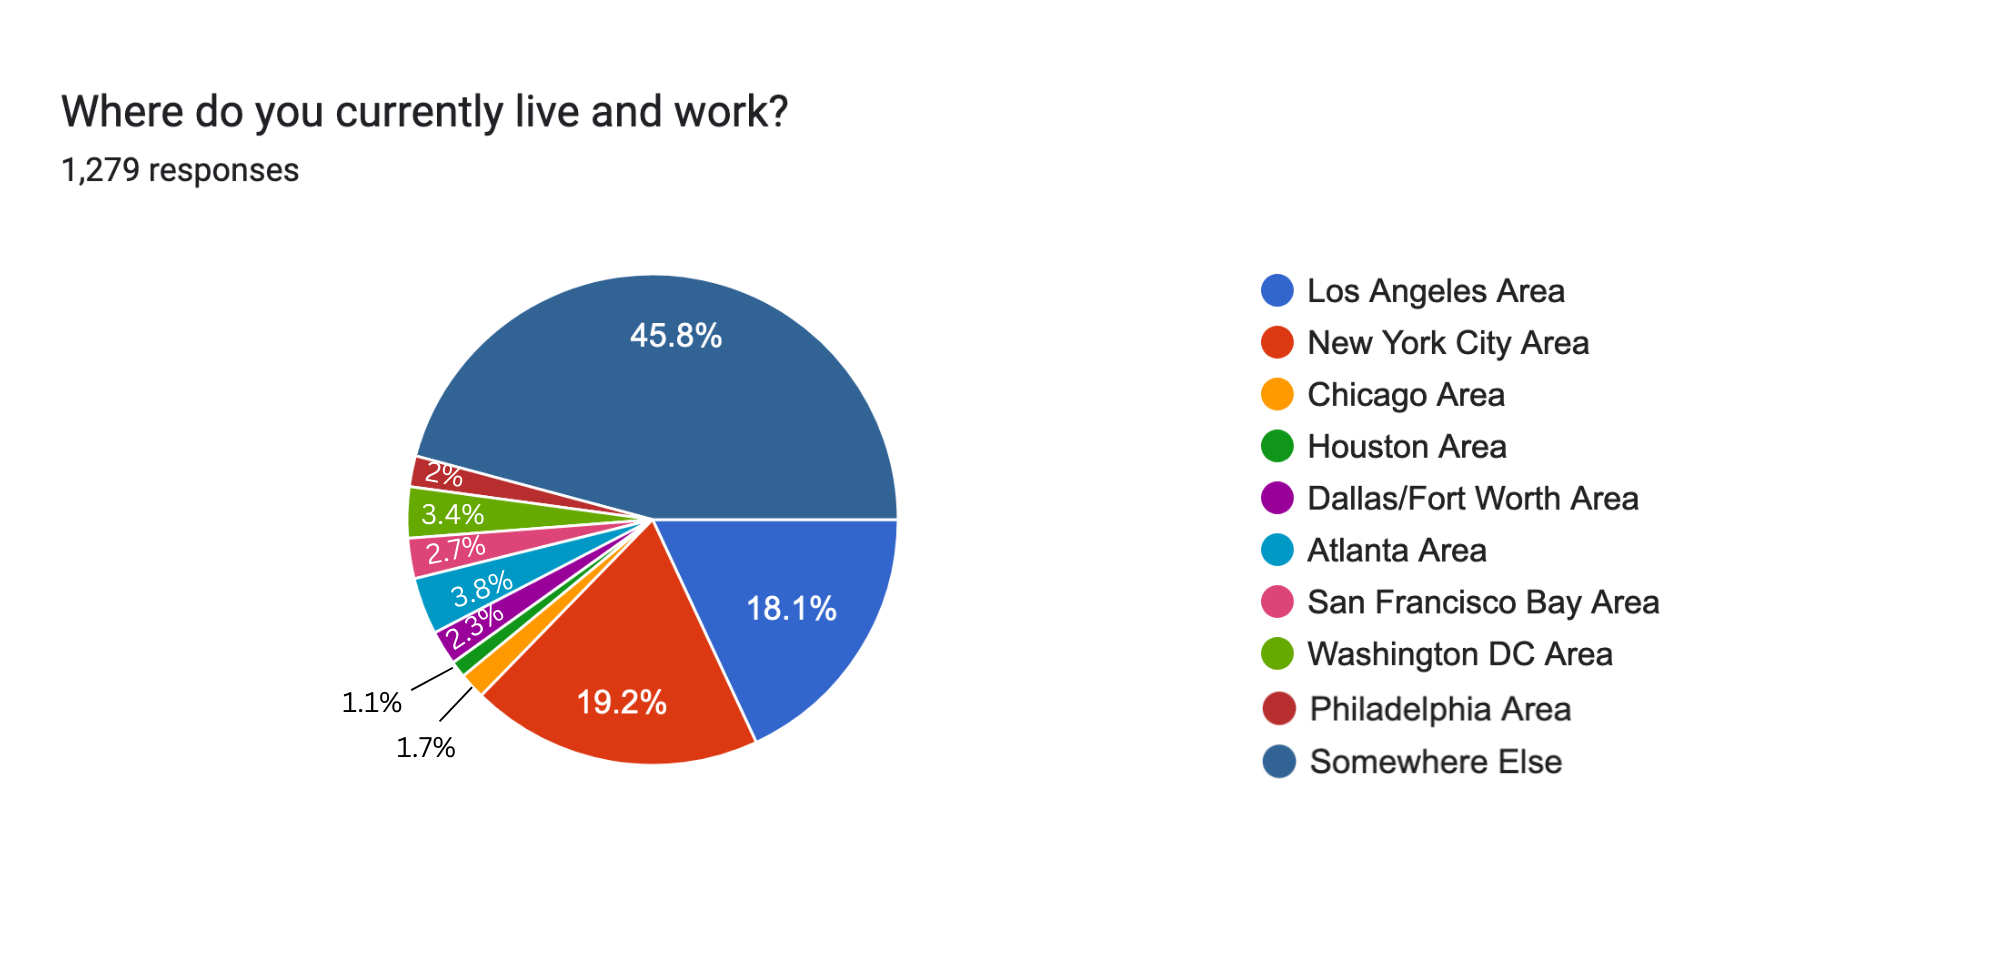 Where do you currently live and work